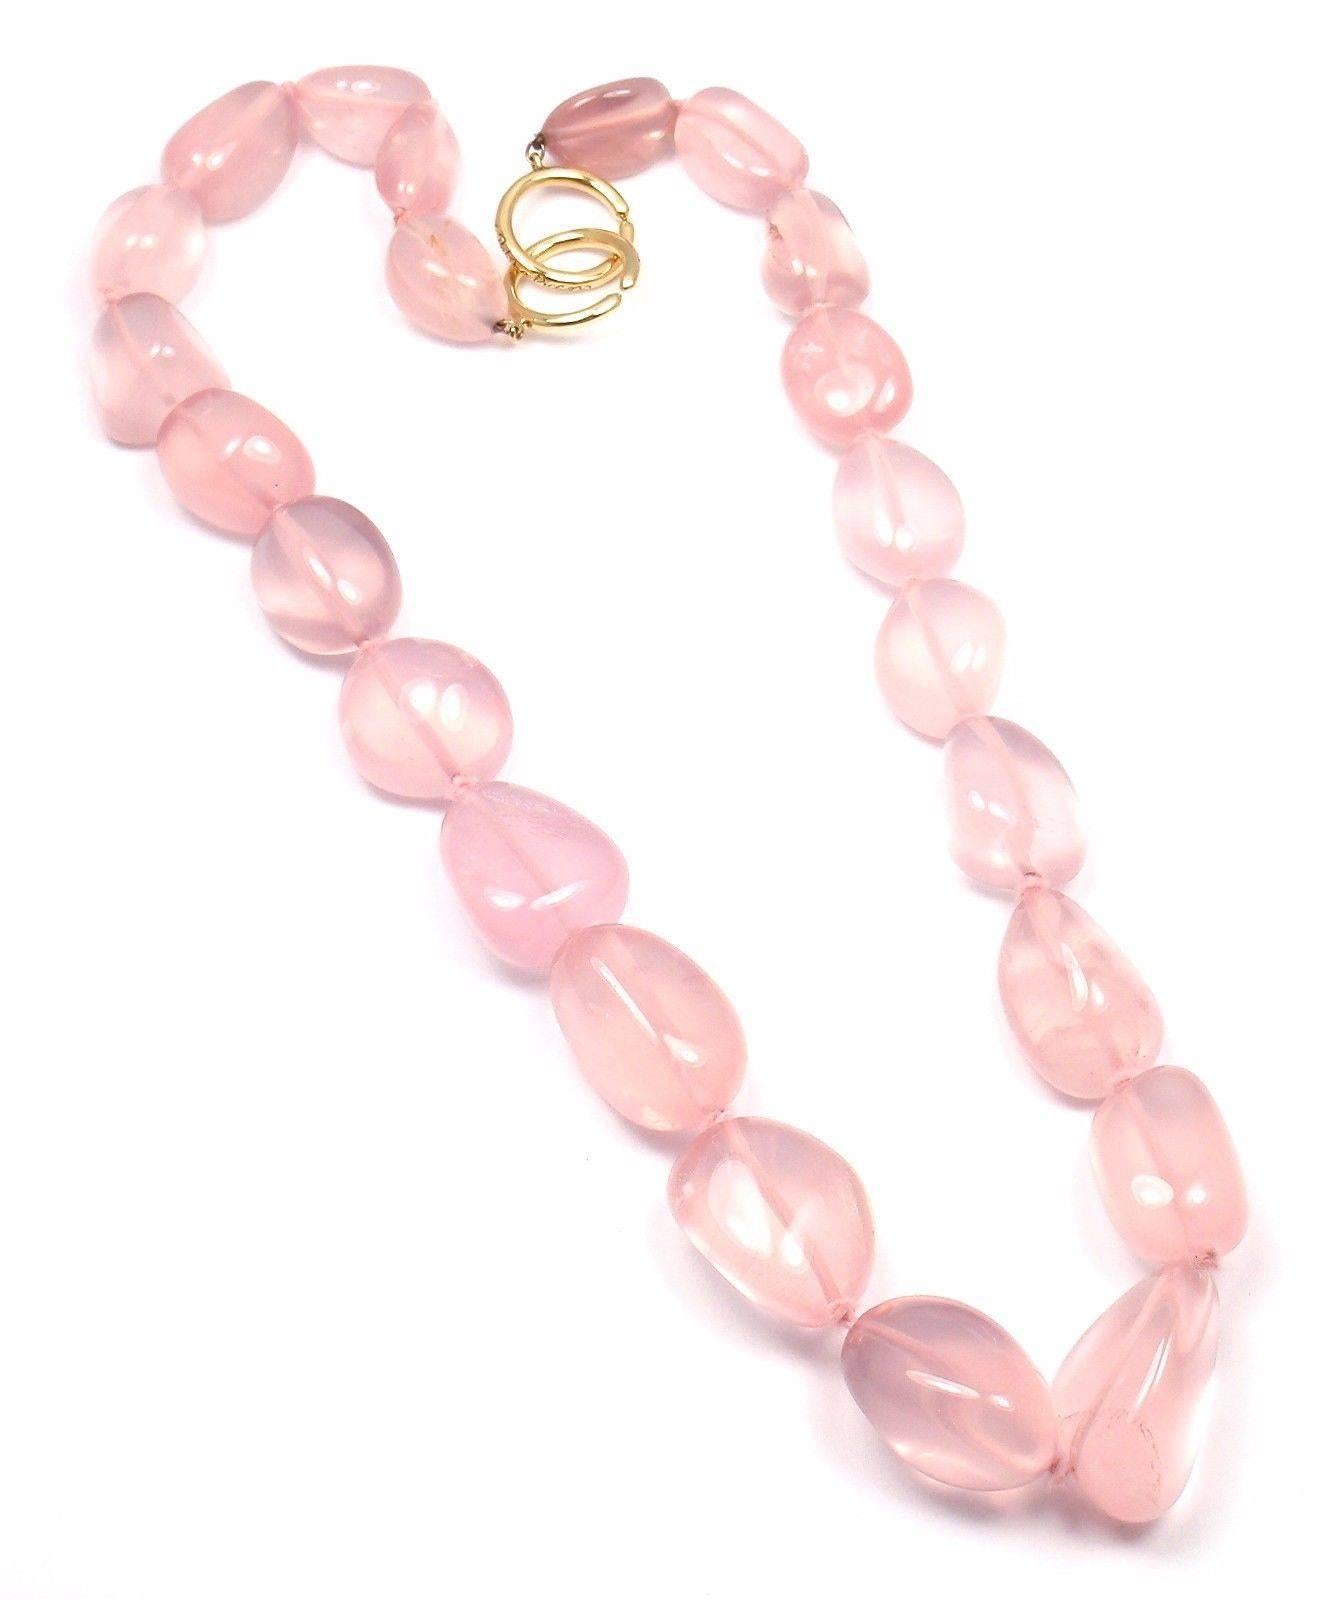 18k Yellow Gold Large Rose Quartz Bead Necklace by Paloma Picasso for Tiffany & Co. 
With 23 rose quartz beads from 18mm to 13mm in width

Details: 
Necklace Length: 24"
Total Weight: 196.0 grams
Stamped Hallmarks: Tiffany & Co 750